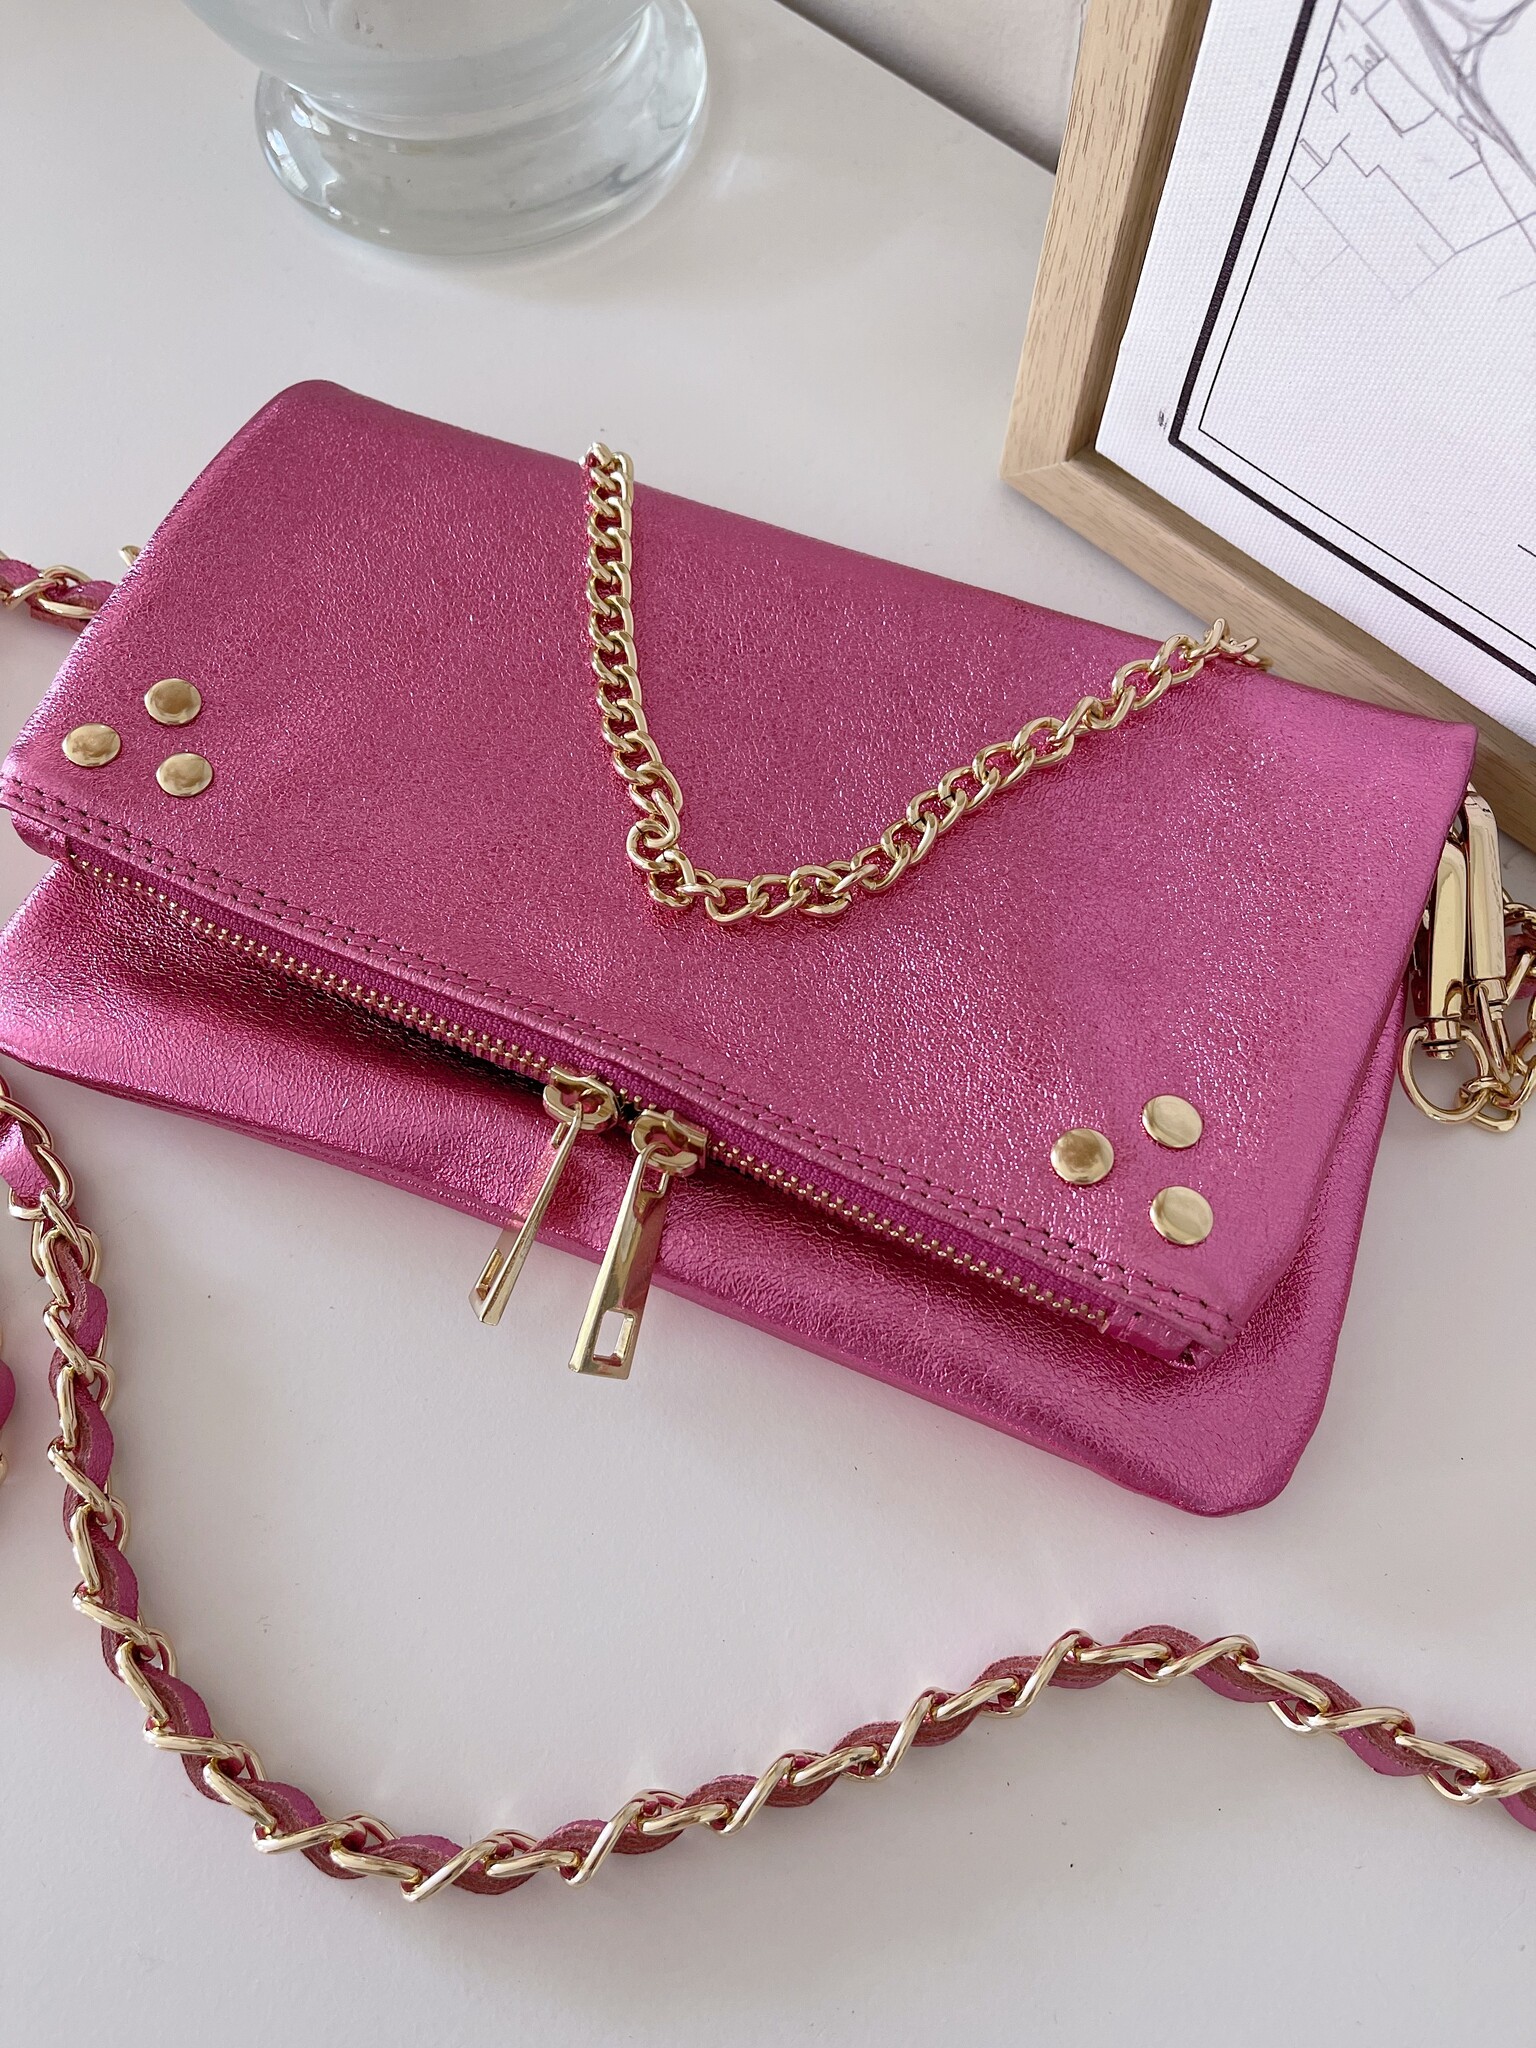 Mini Fashionable Saddle Bag With Stitch Detail And Flap Cover, Crossbody  Shoulder Bag | SHEIN USA